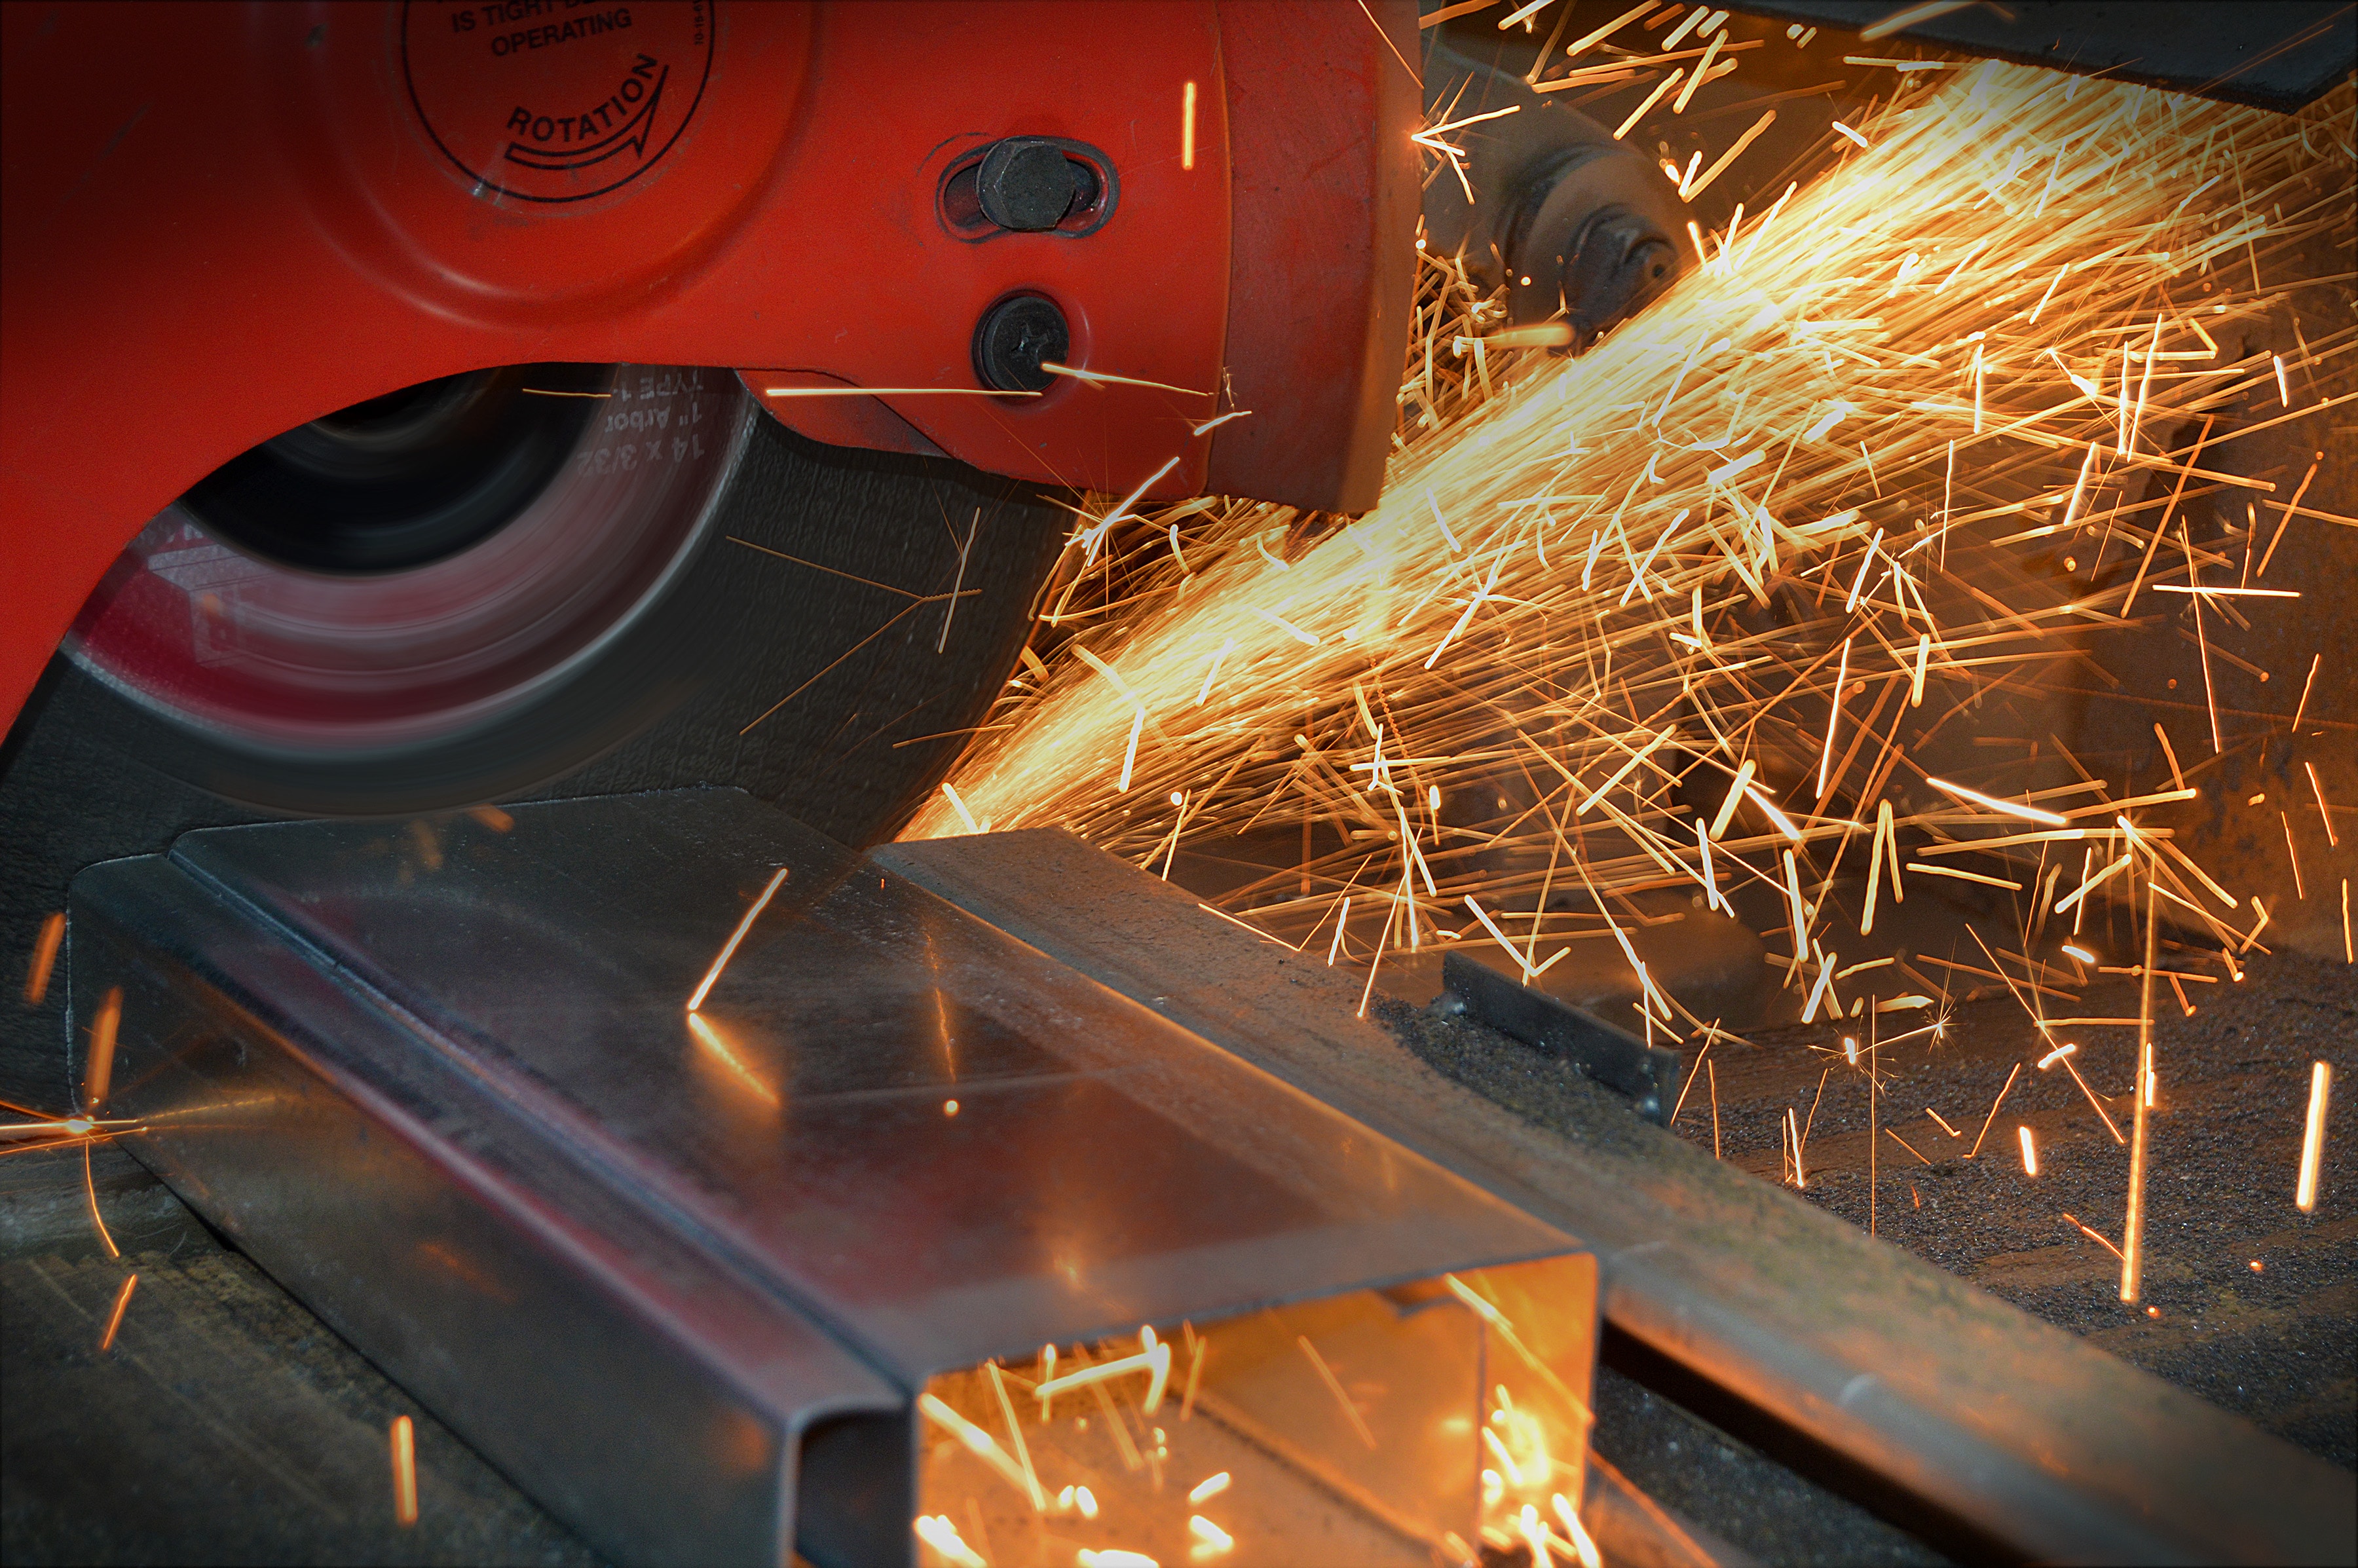 Photograph of a person cutting metal